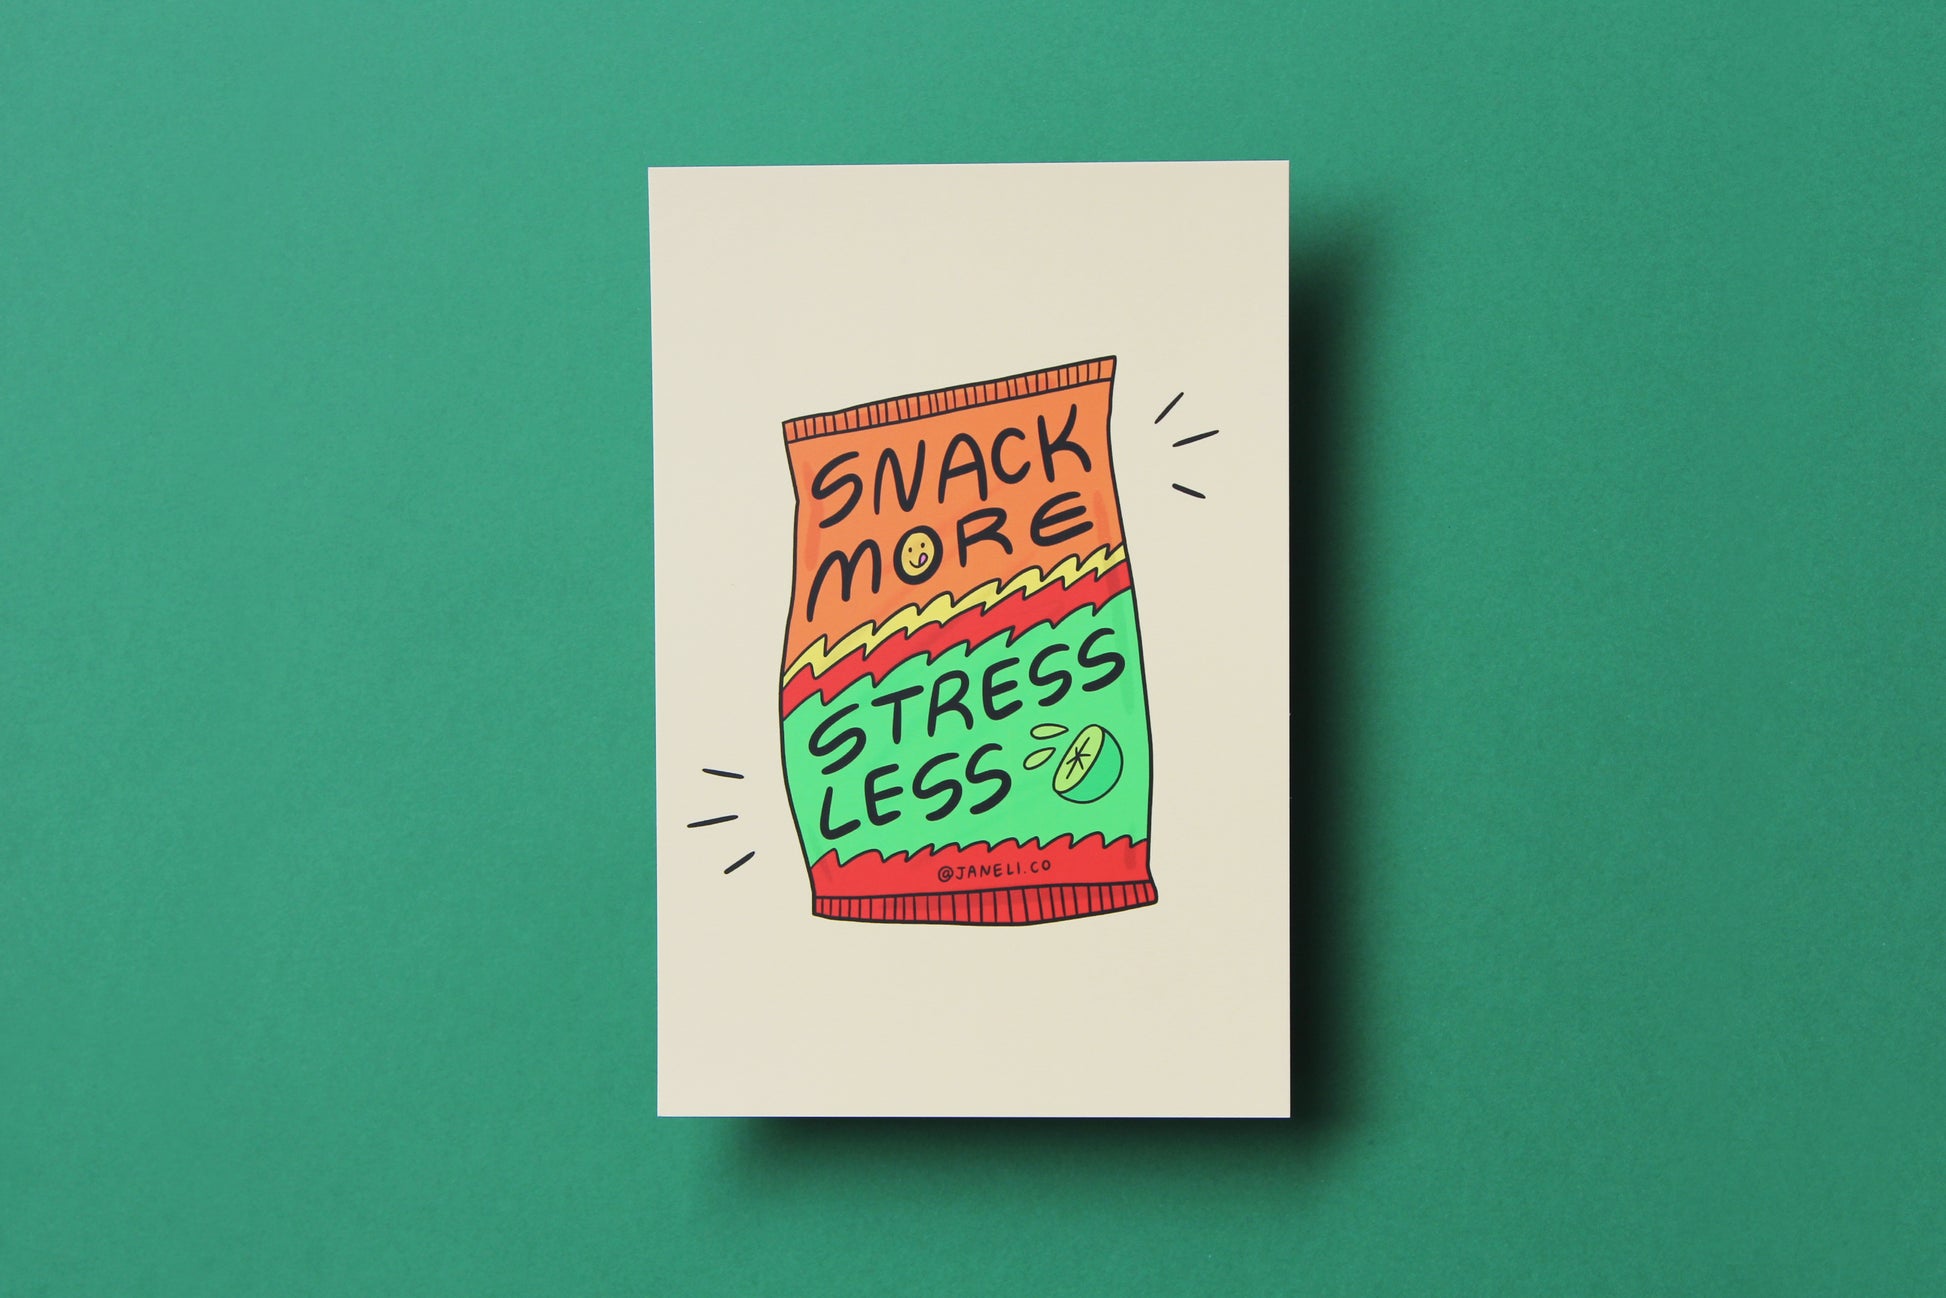 A JaneLi.Co mini print/postcard of a lime hot cheeto chip bag that says "Snack more stress less" over a green background.